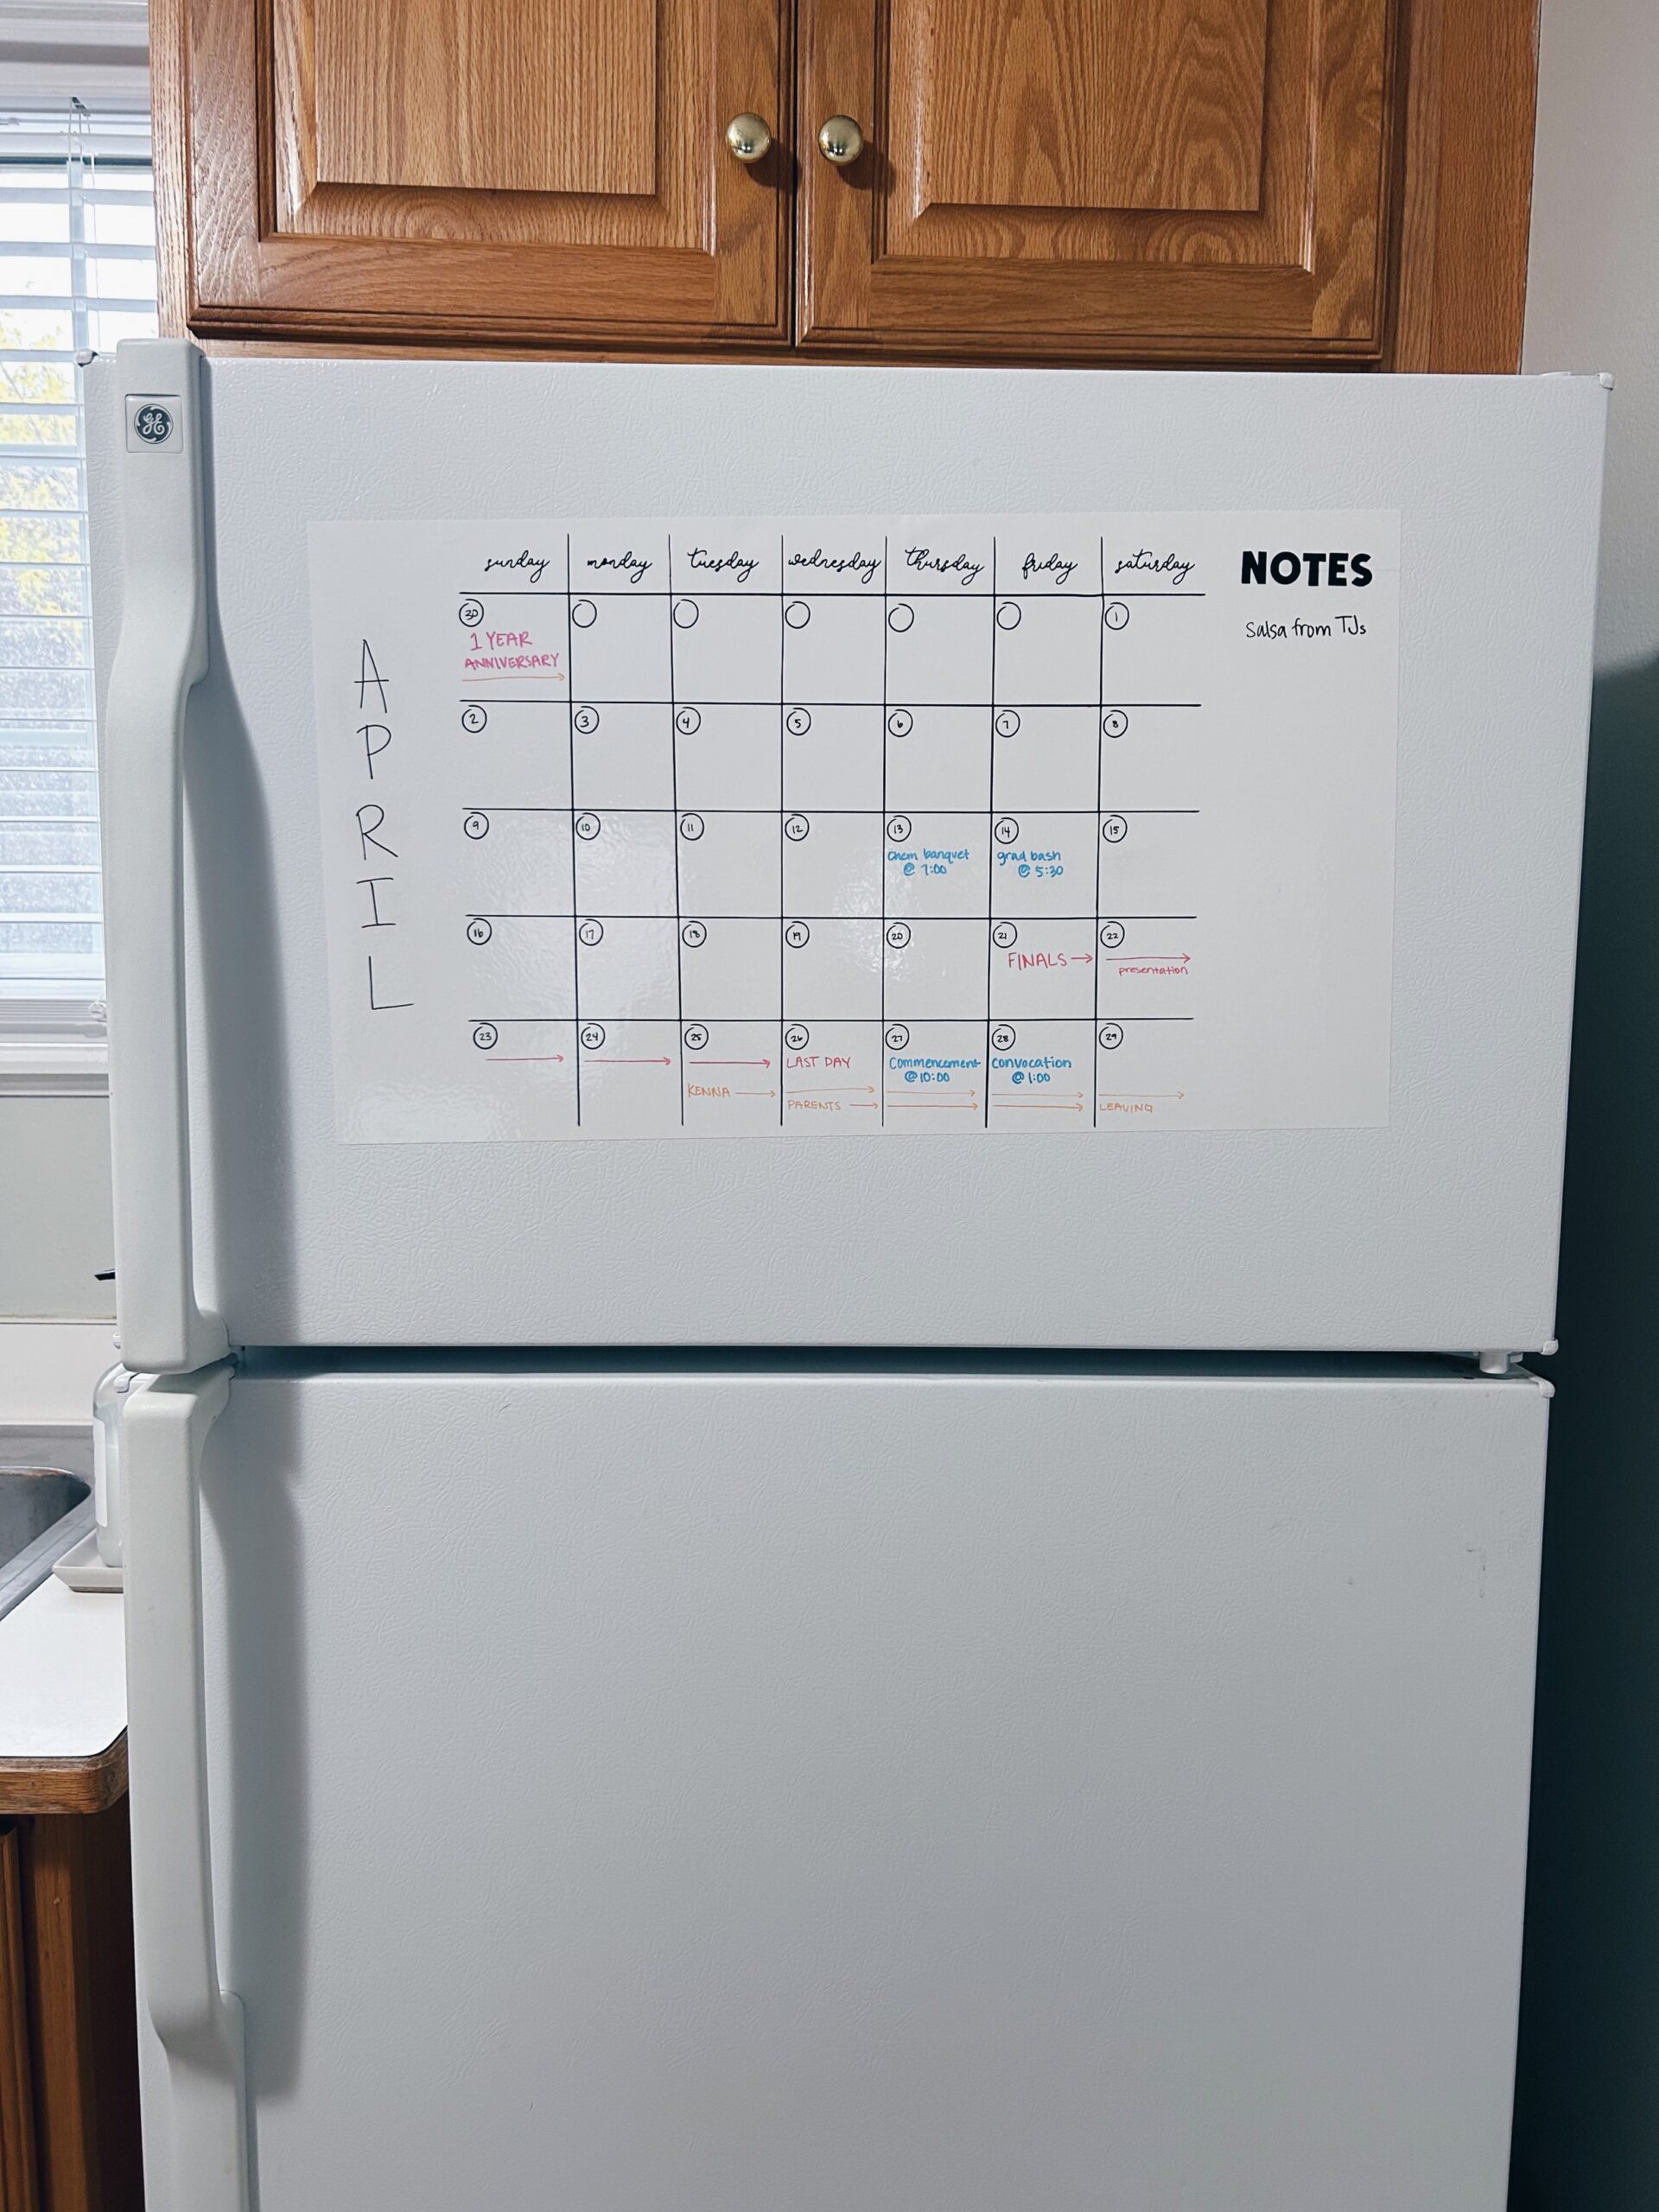 DIY chore chart – a cute and easy home organization hack with Cricut!